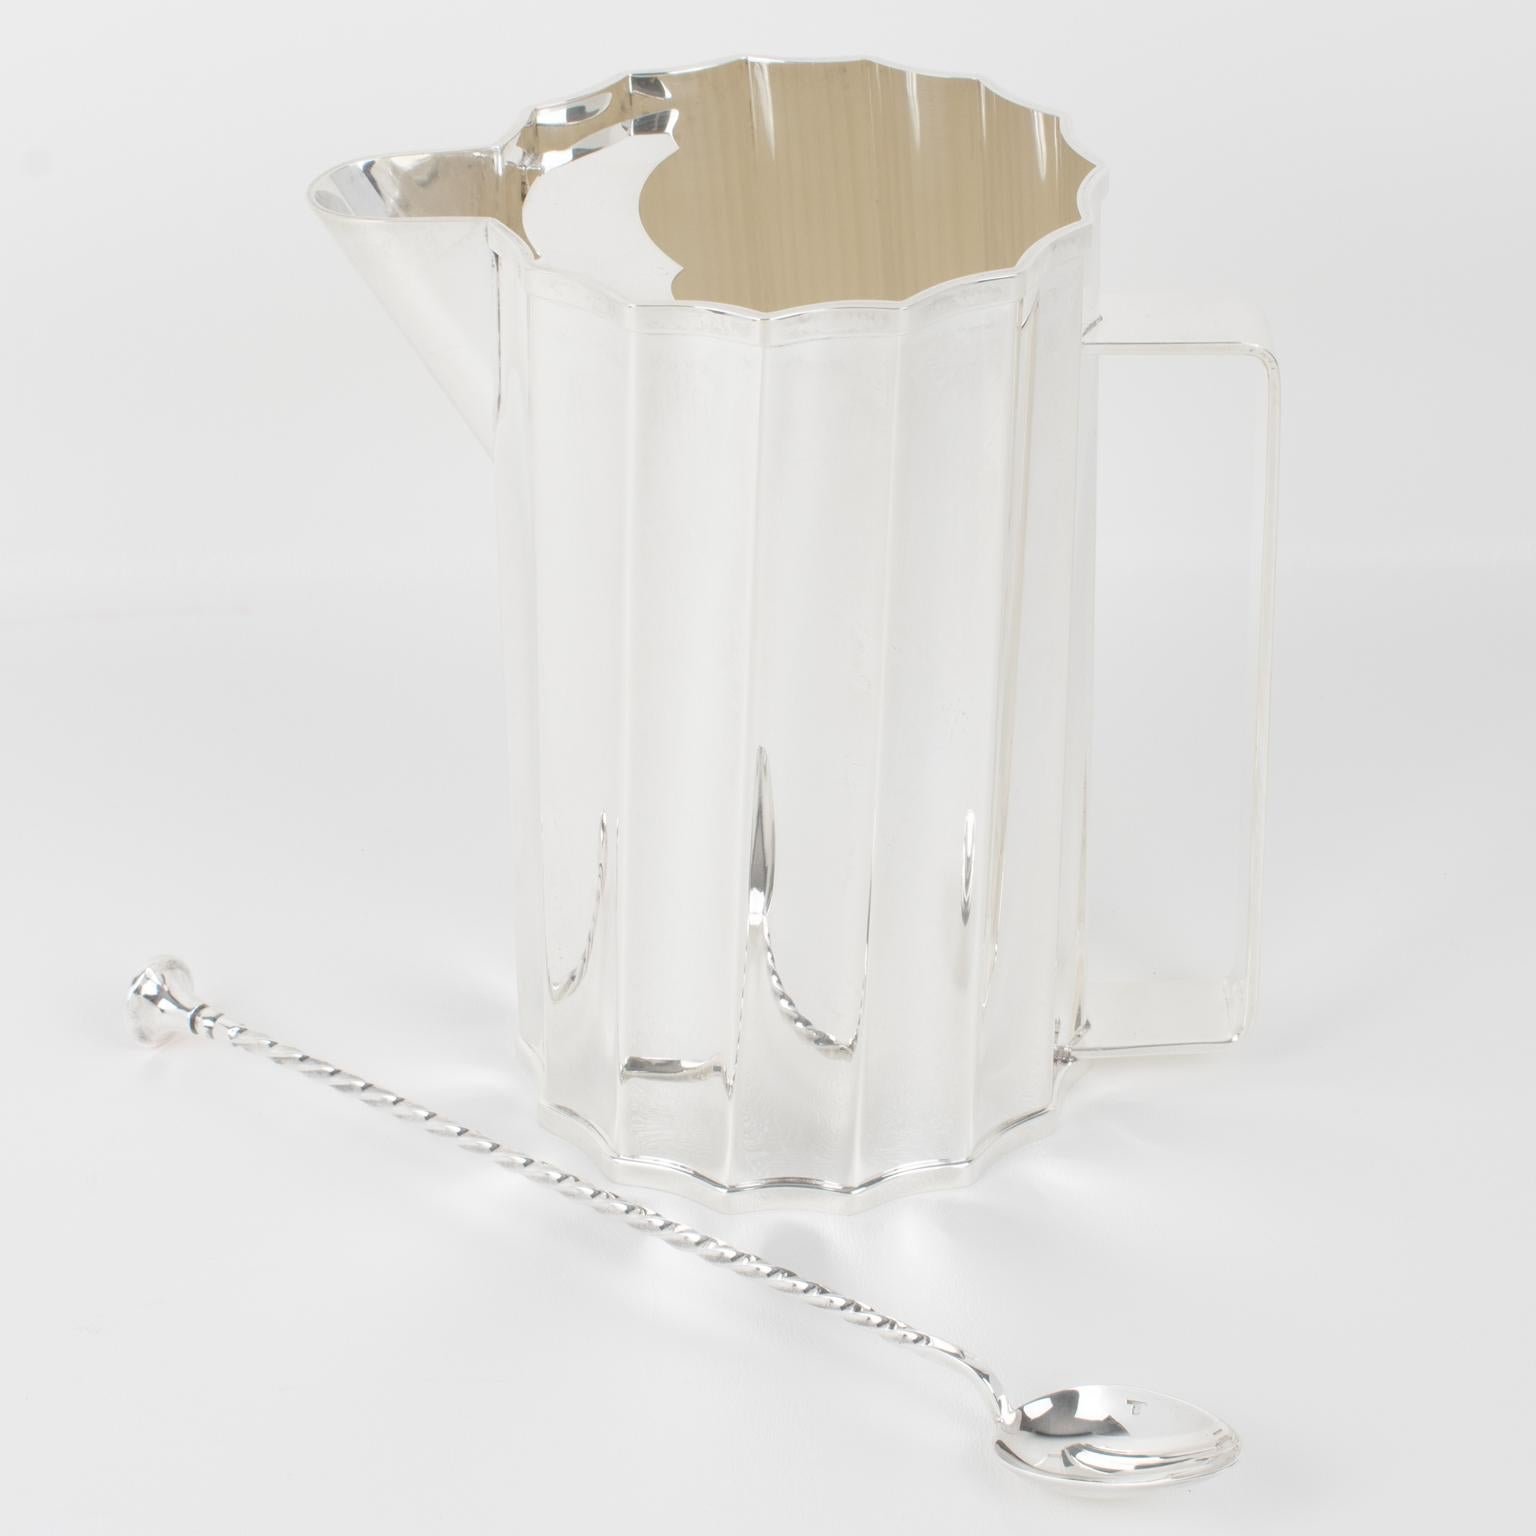 So elegant, modernist Art Deco-inspired silver plate barware cocktail or Martini pitcher designed by St James, Brazil. This drink jug has a minimalist chic design boasting a geometric twisted scalloped sunburst shape, a sturdy handle, and an ice